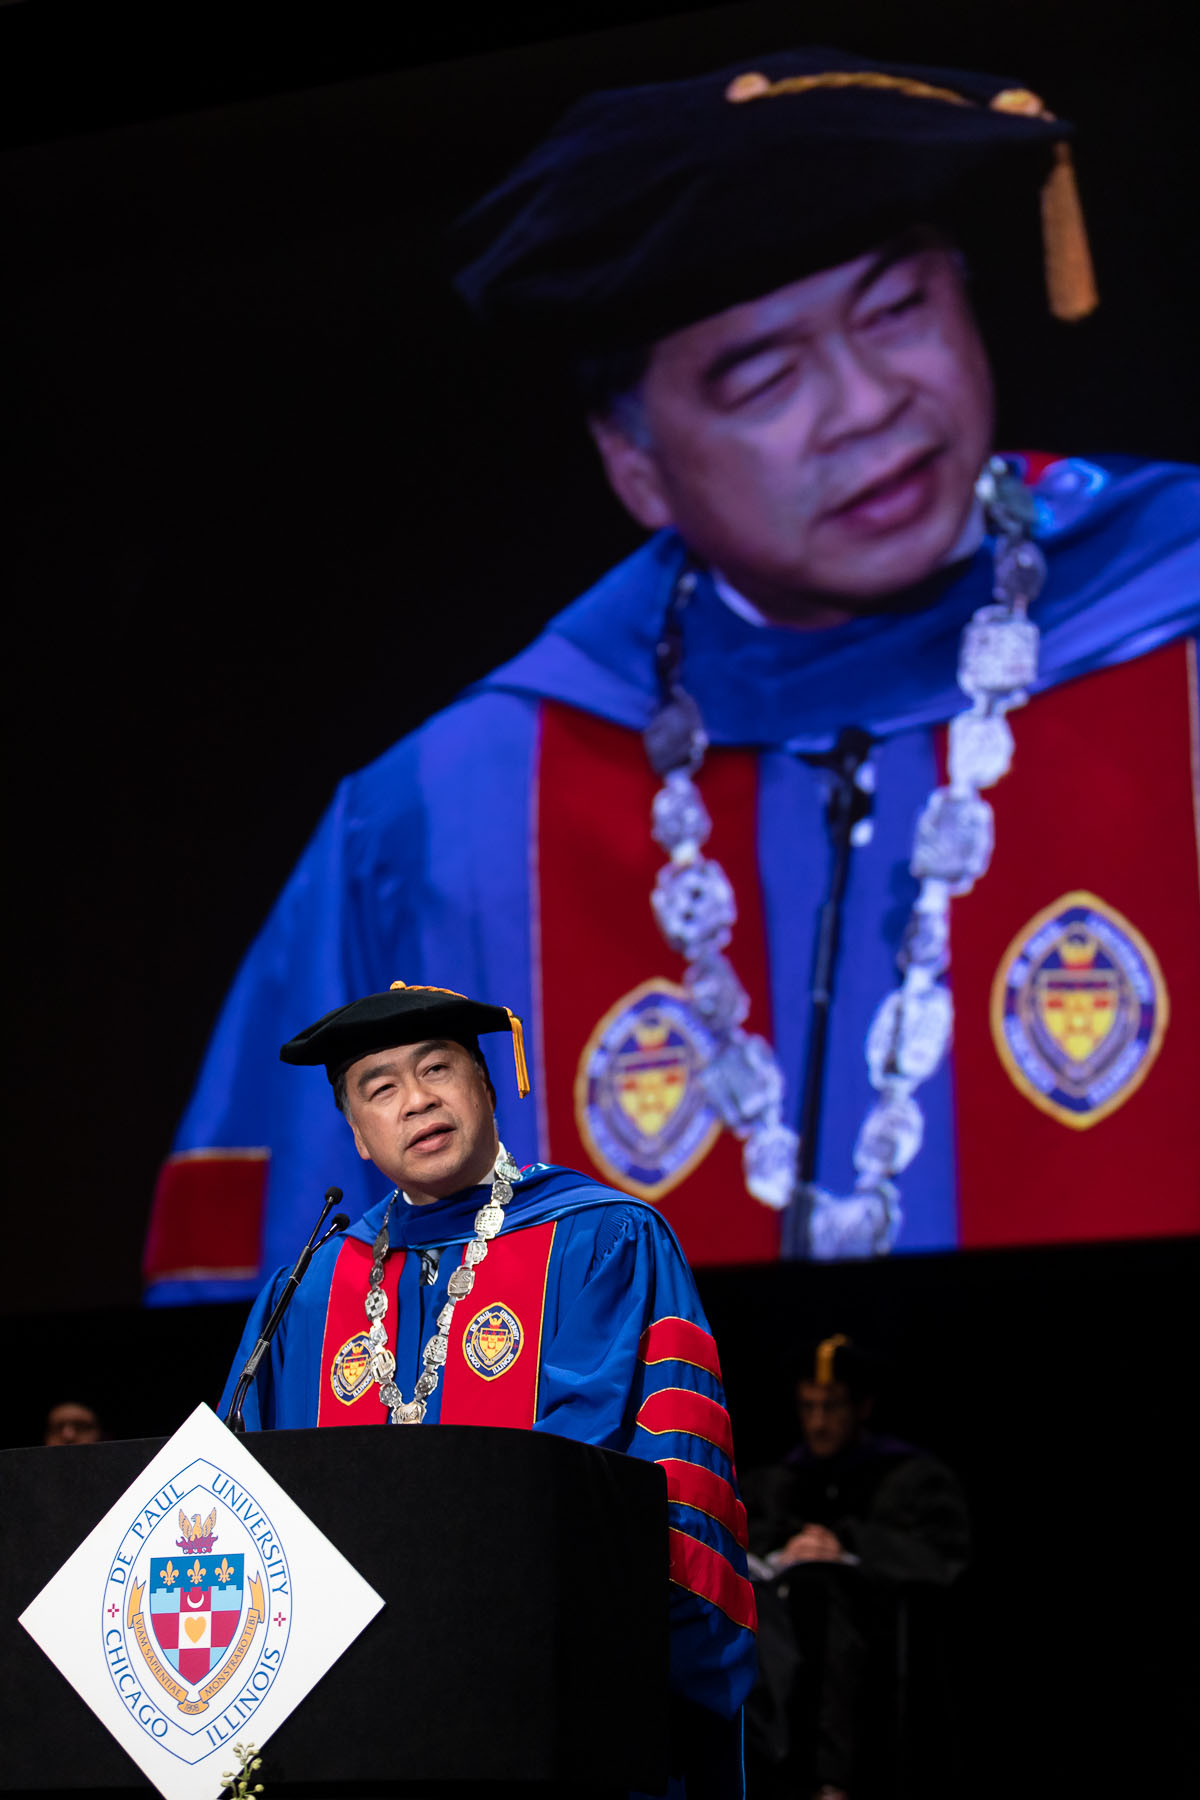 College of Law Commencement 2019